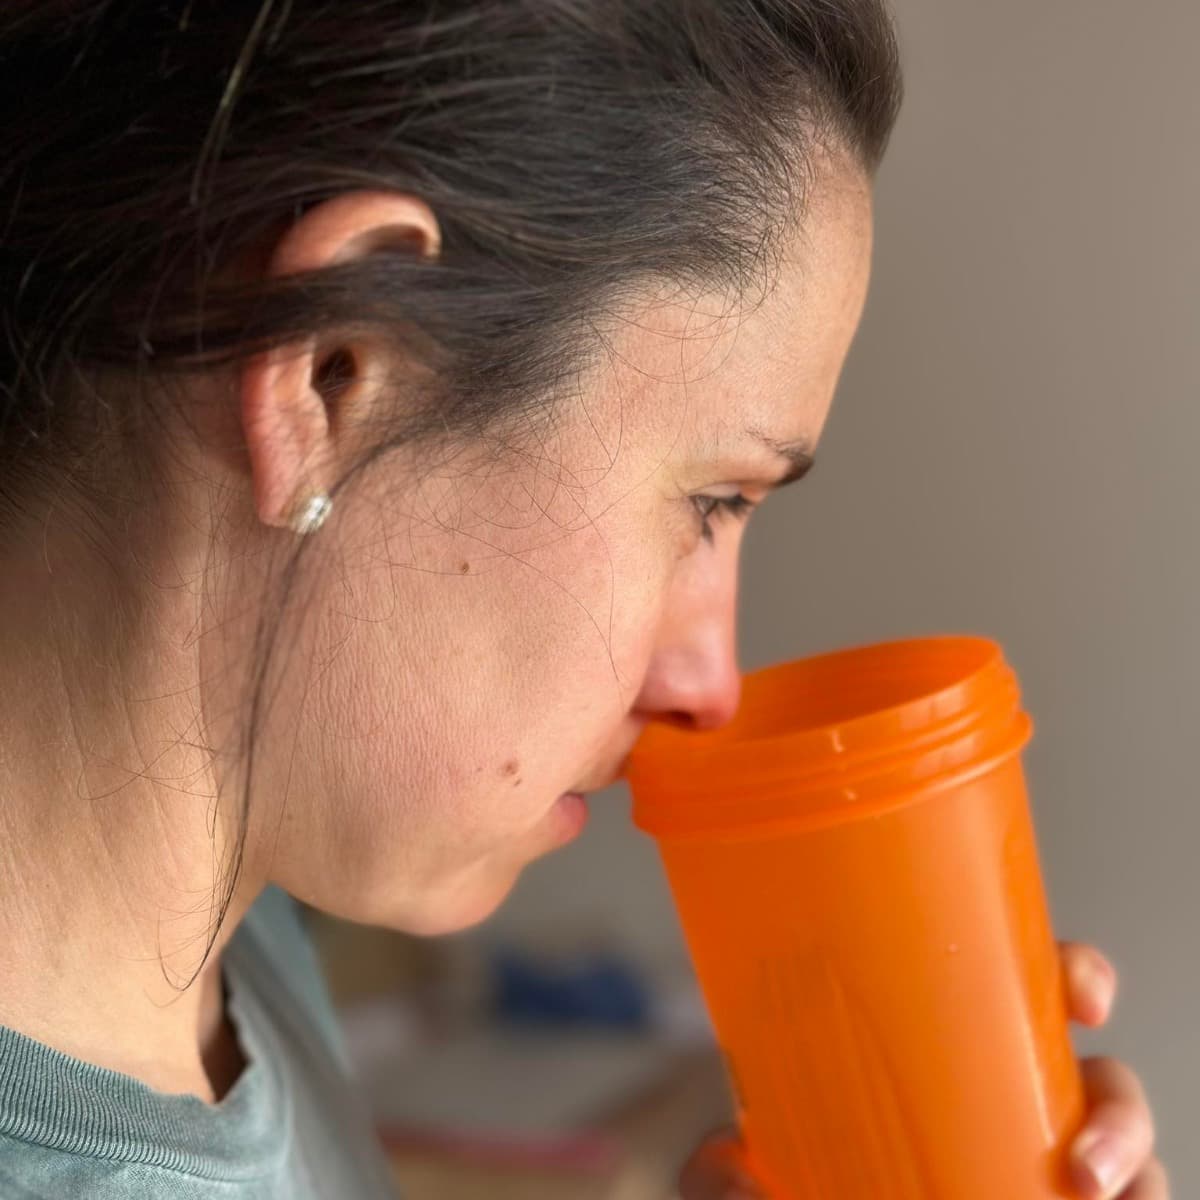 How To Clean A Smelly Protein Shaker